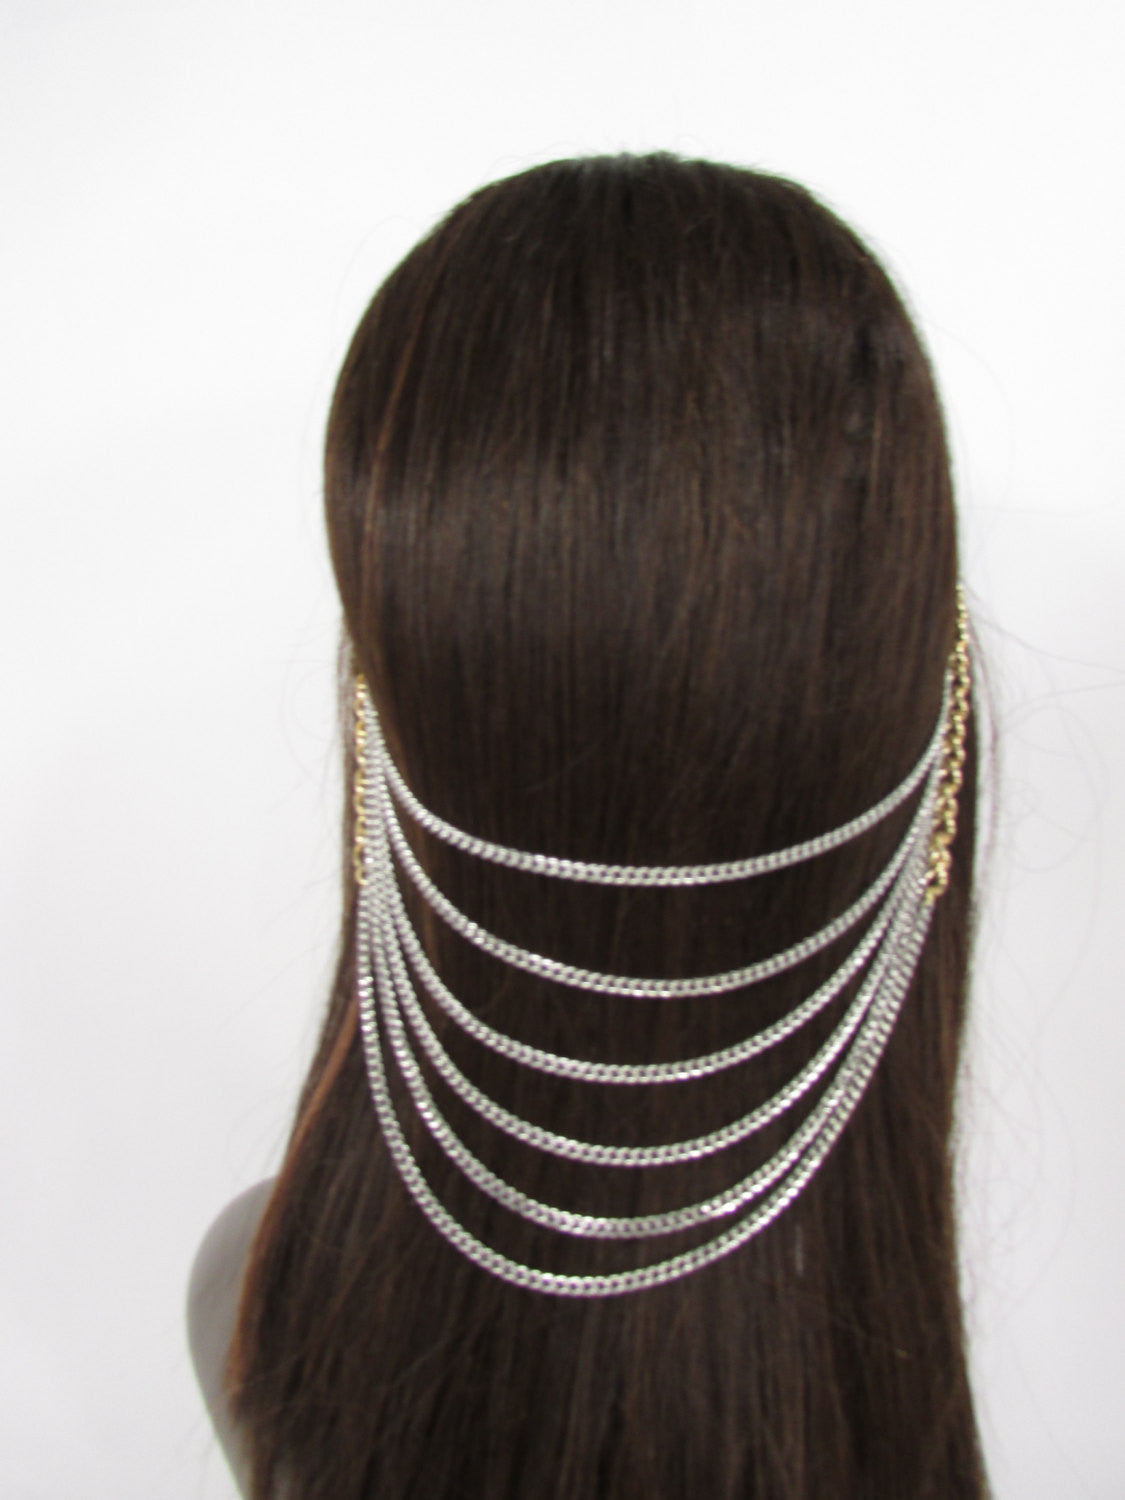 Brand Trendy Women Gold Metal Long Head Chain Sides Clips Multi Waves Silver / Black Draps Strands Fashion Jewelry #0003 - alwaystyle4you - 4